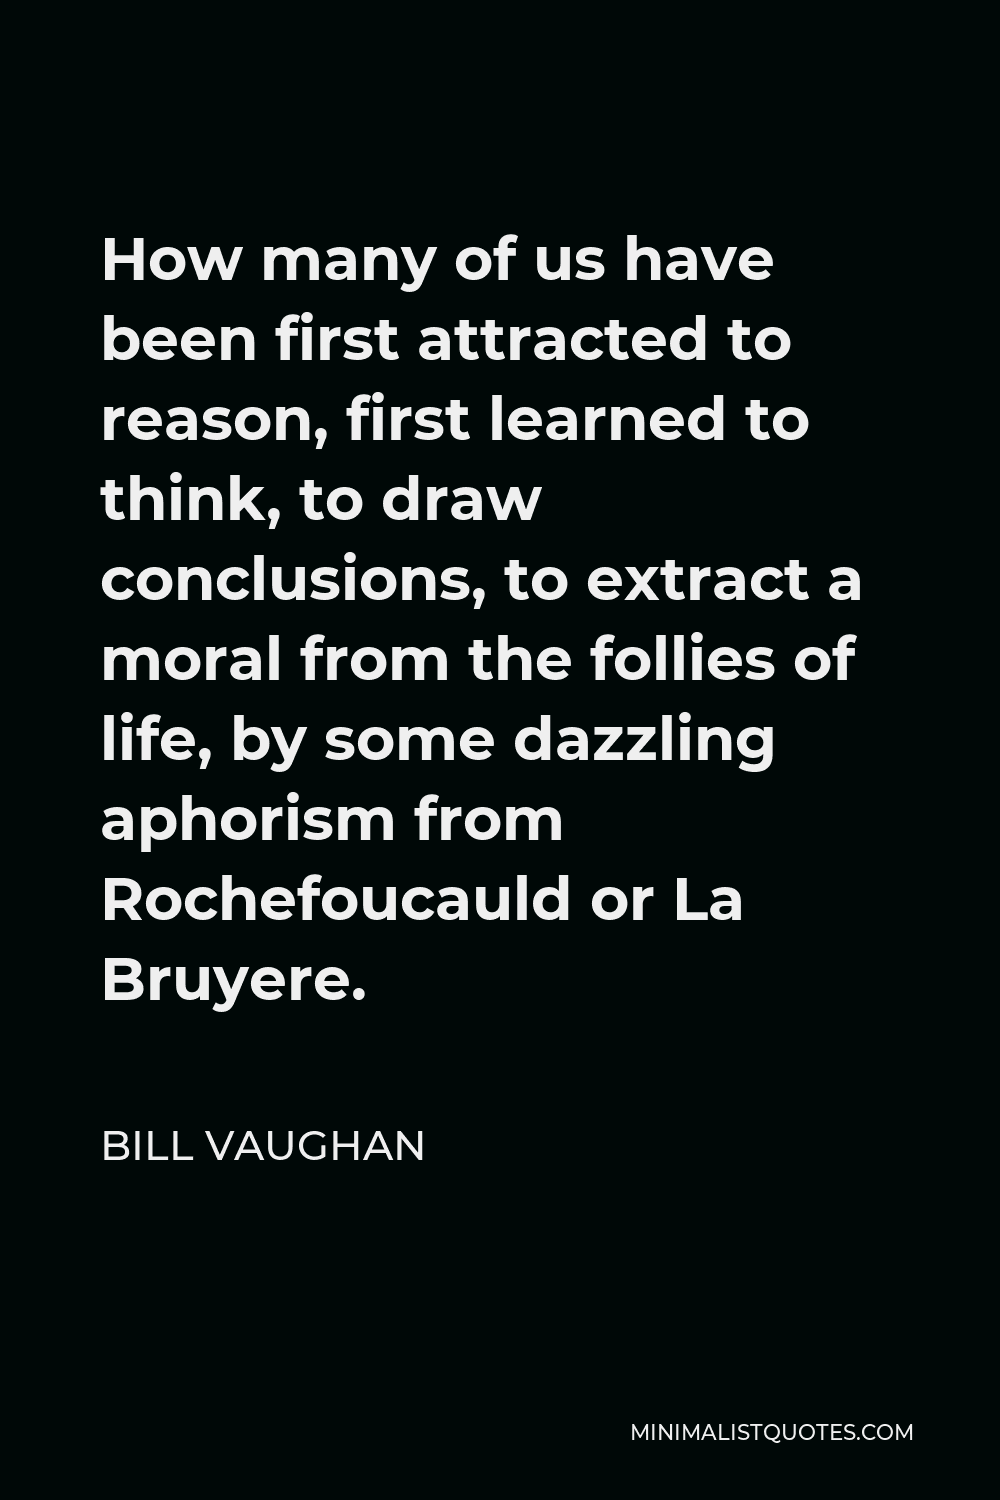 Bill Vaughan Quote - How many of us have been first attracted to reason, first learned to think, to draw conclusions, to extract a moral from the follies of life, by some dazzling aphorism from Rochefoucauld or La Bruyere.